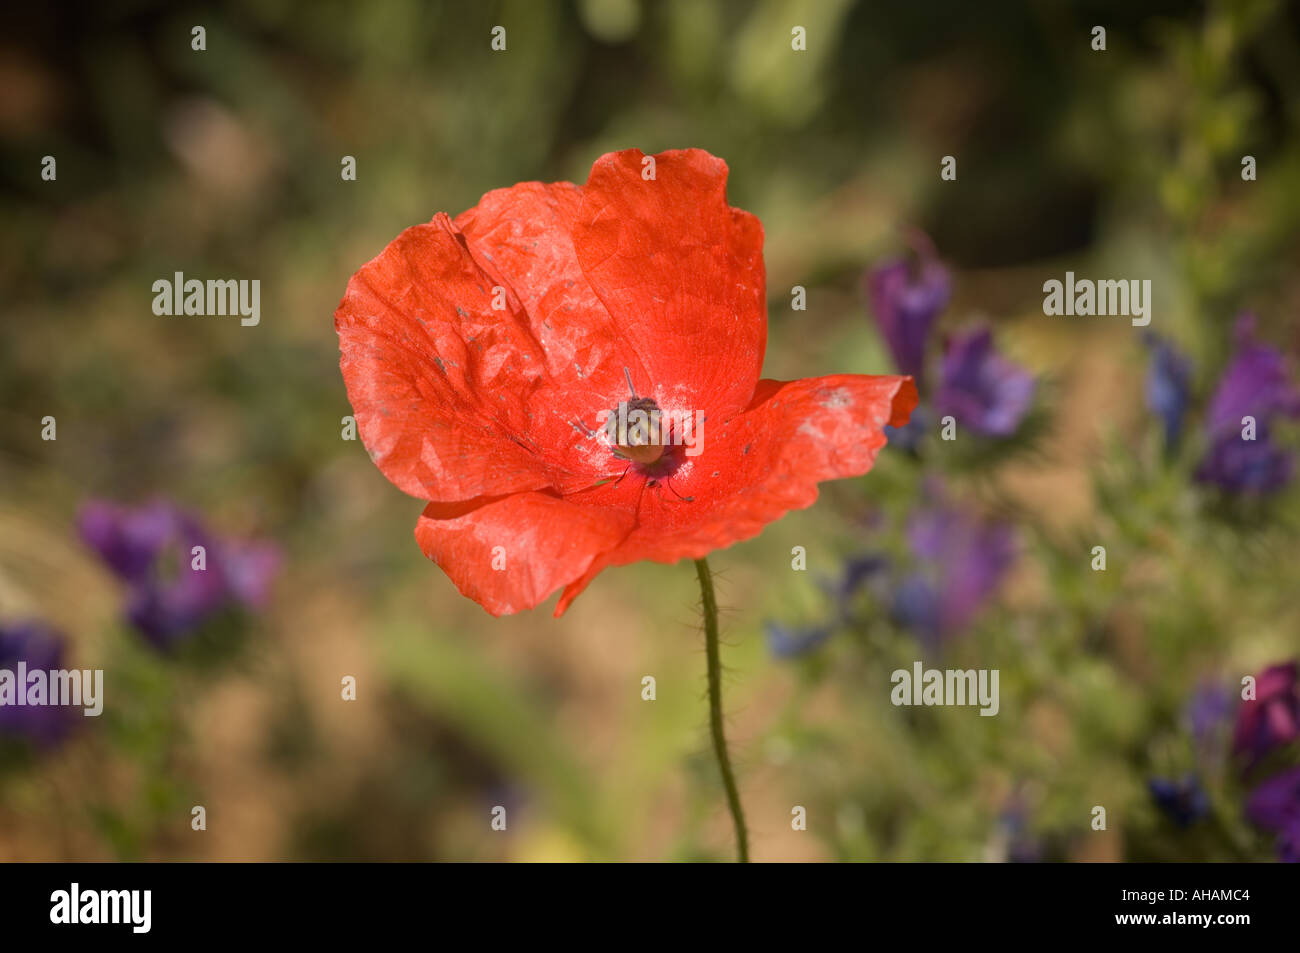 Color horizontal image of a red poppy in a field of purple wild flowers Stock Photo